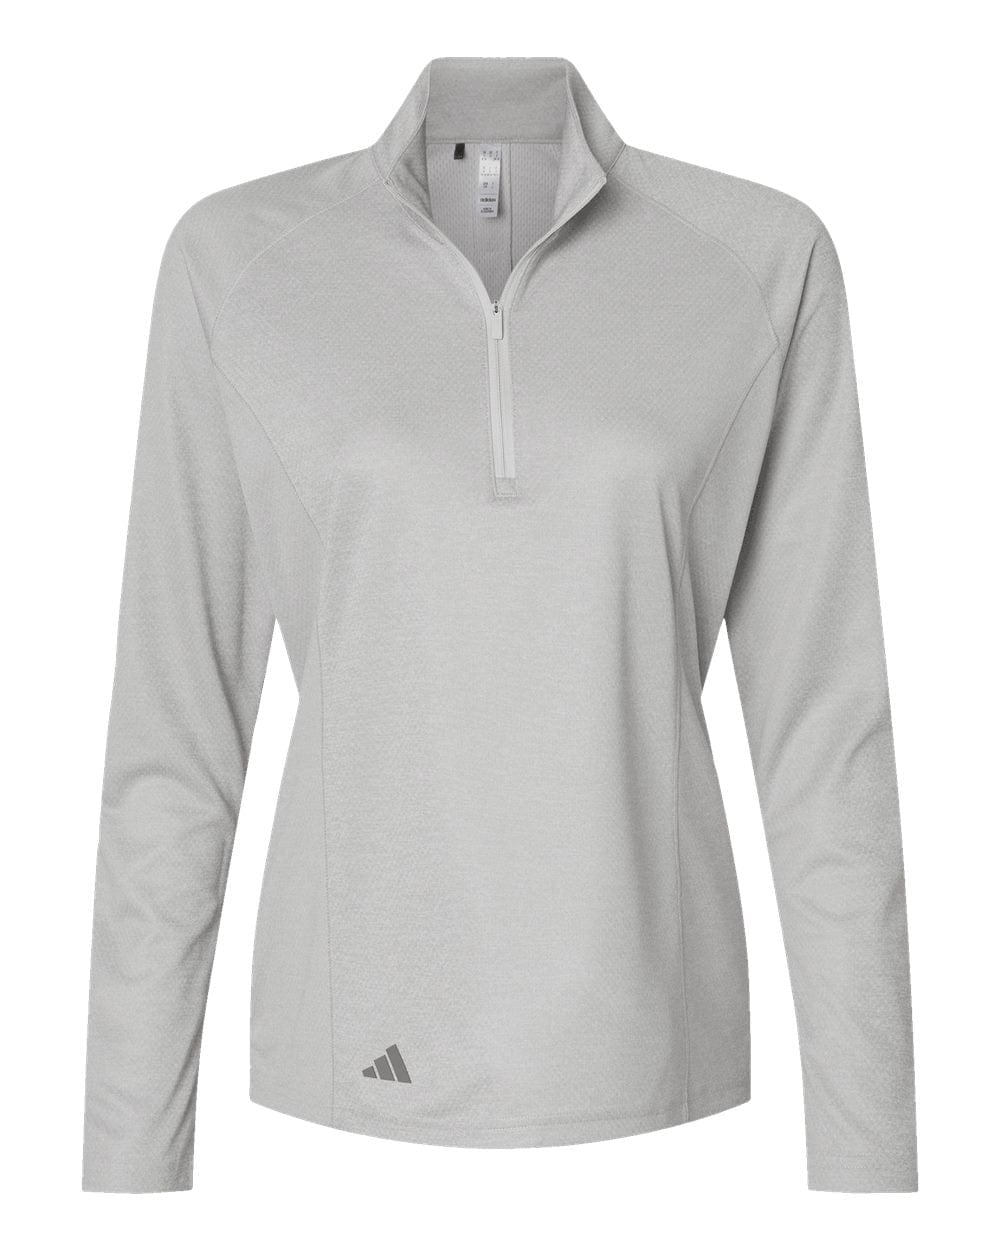 adidas Layering S / Grey One Heather adidas - Women's Space Dyed 1/4-Zip Pullover